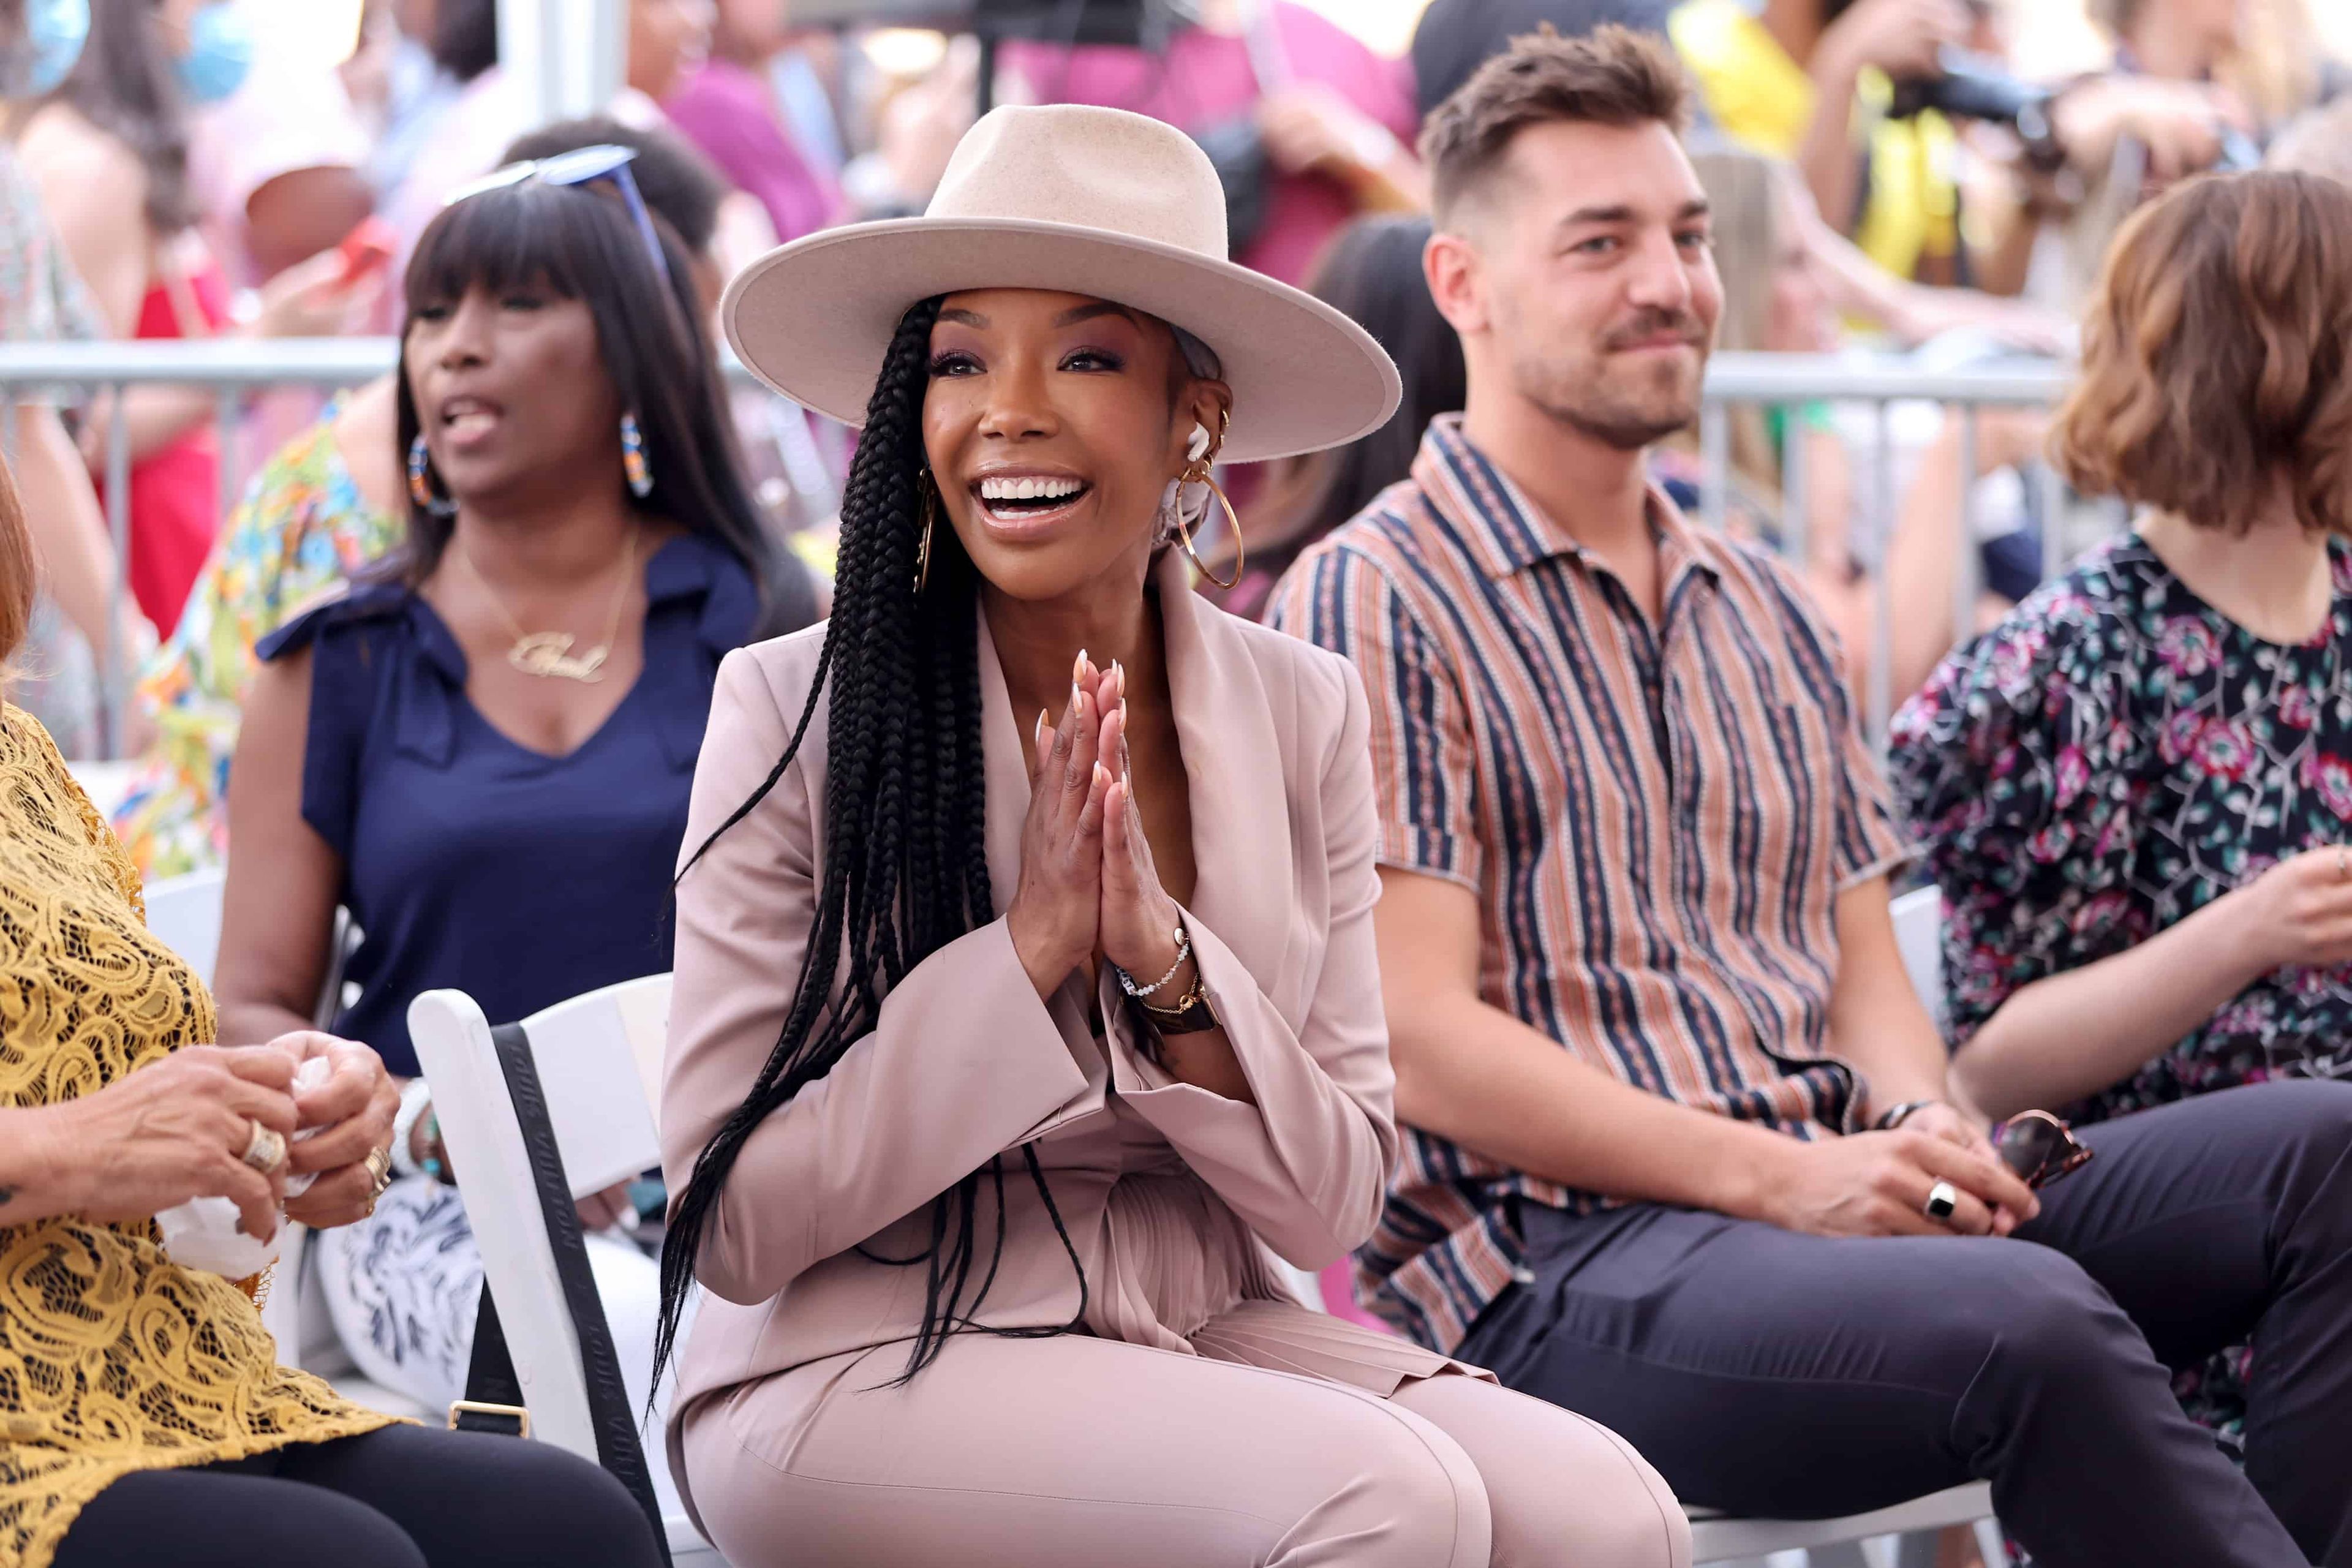 Brandy To Release Christmas Album, Possibly Titled 'A Brandy Christmas'